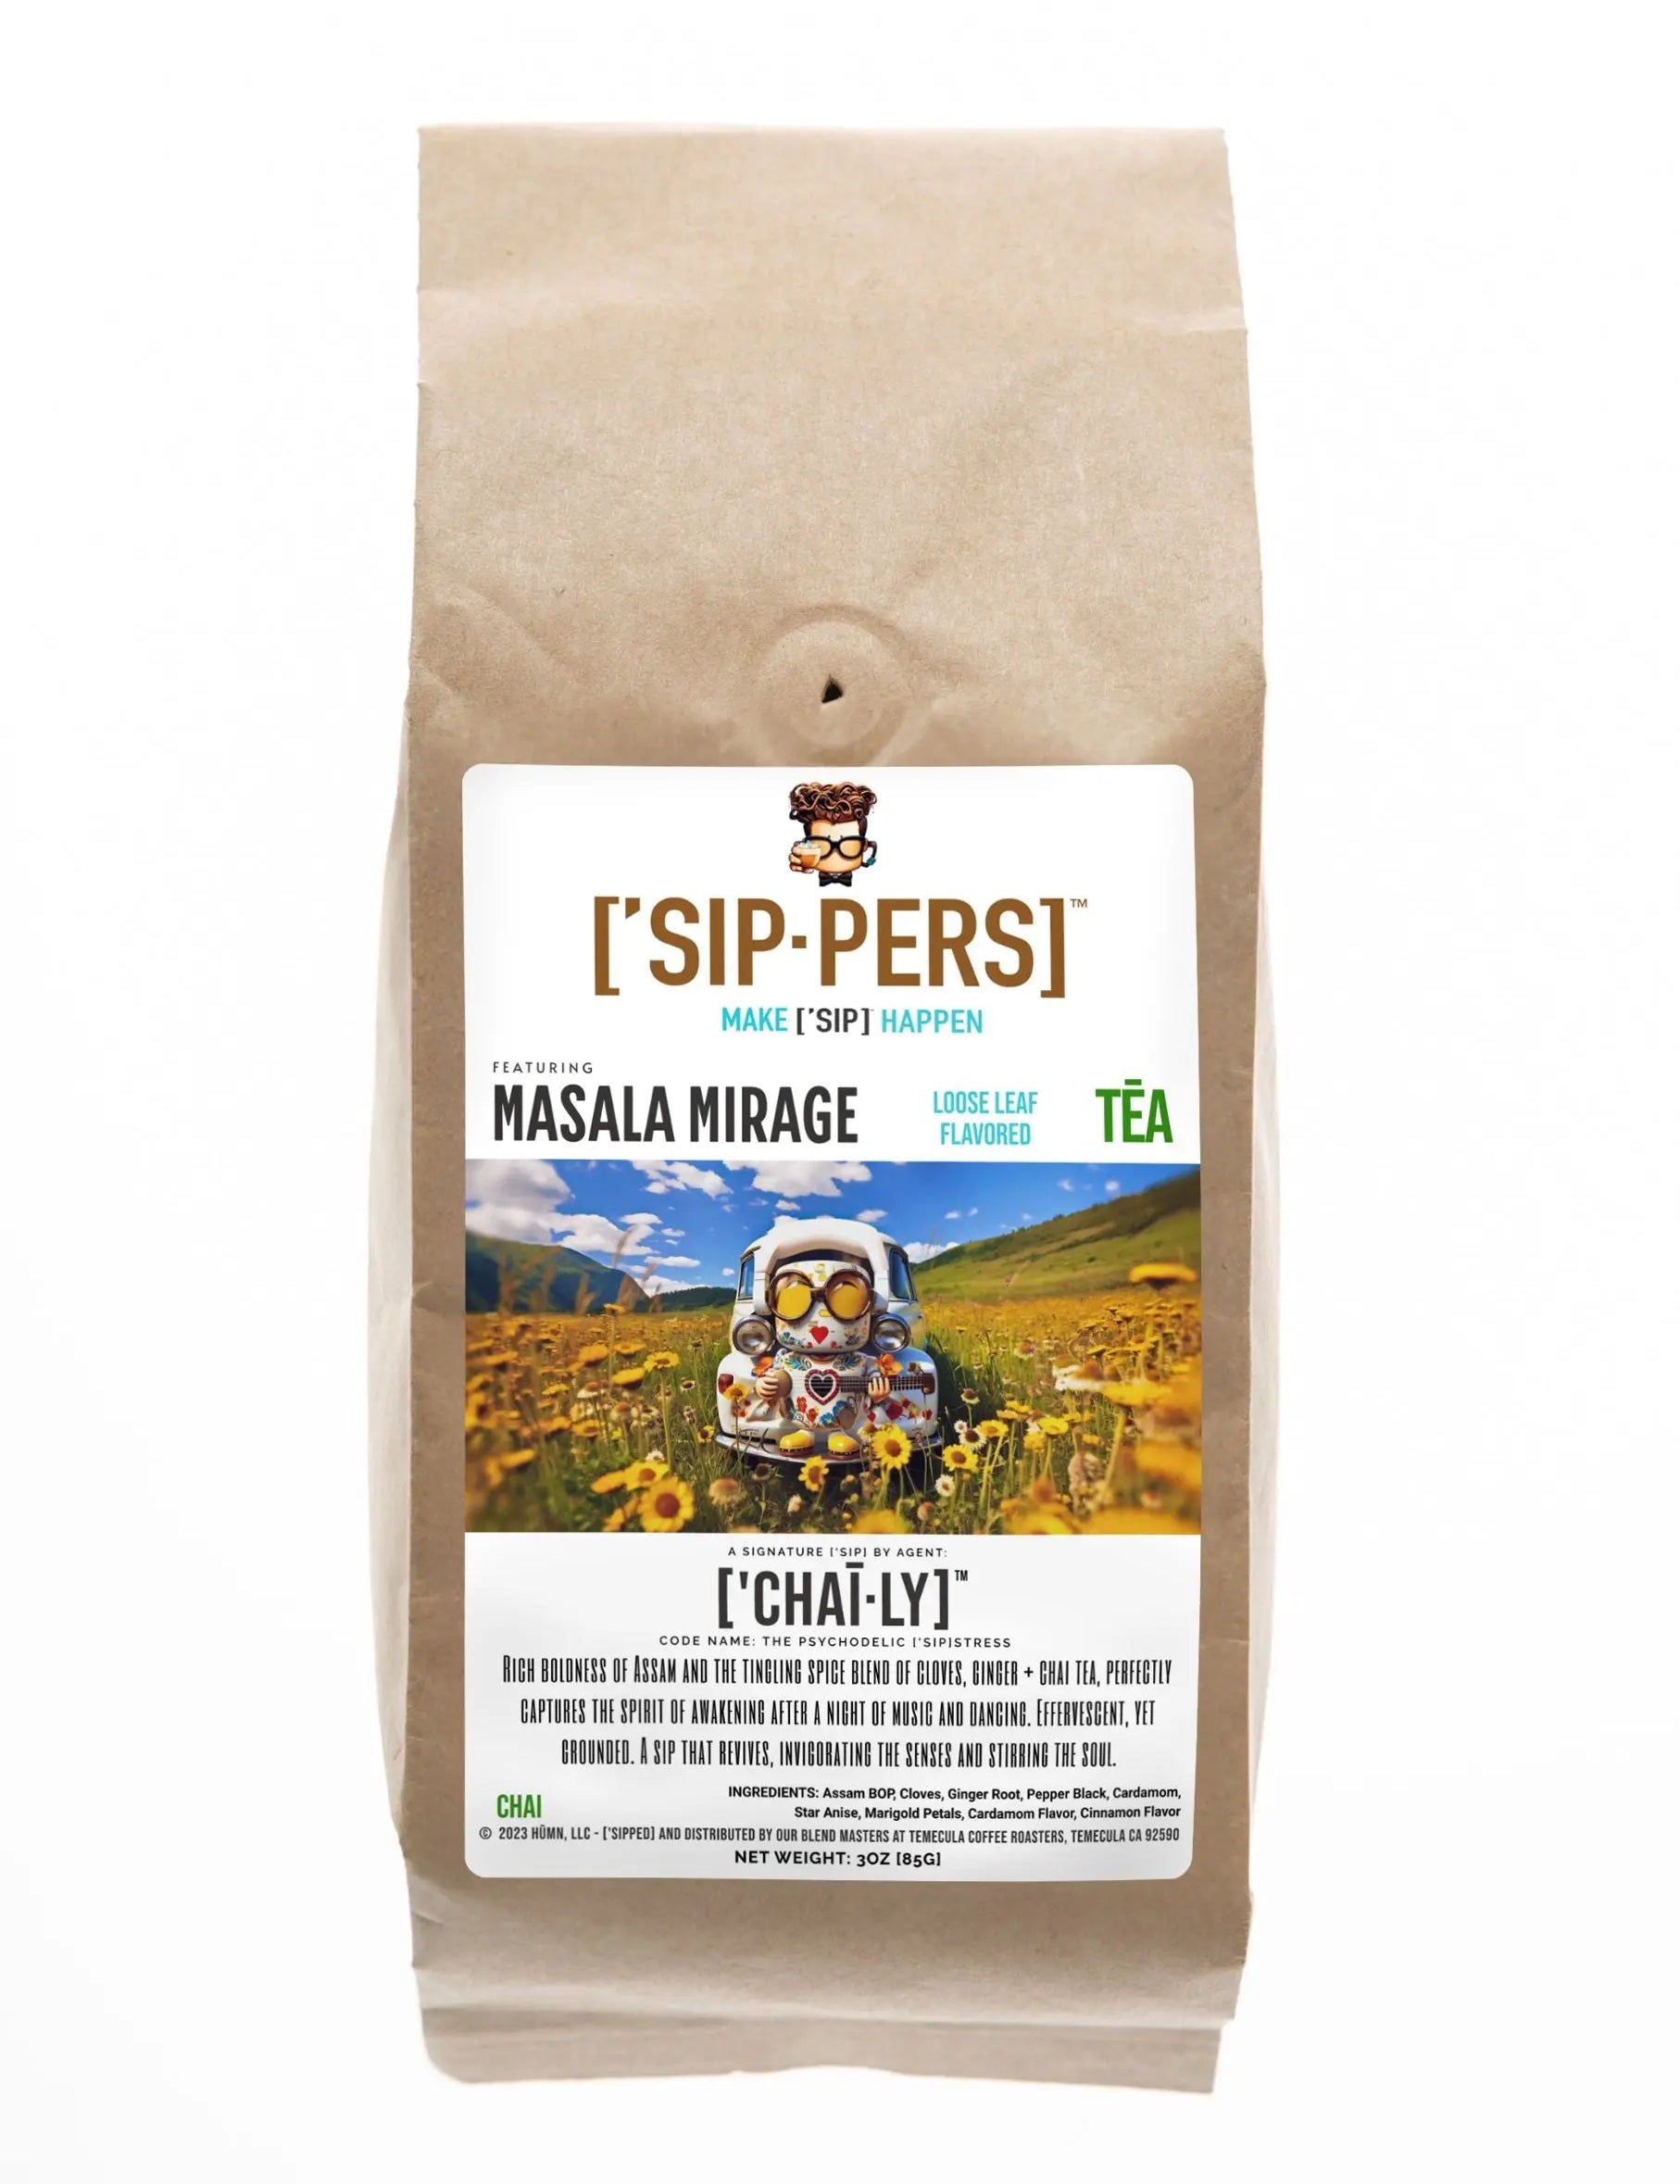 Spiced Masala Chai Mirage Sippers Tea by Chaily